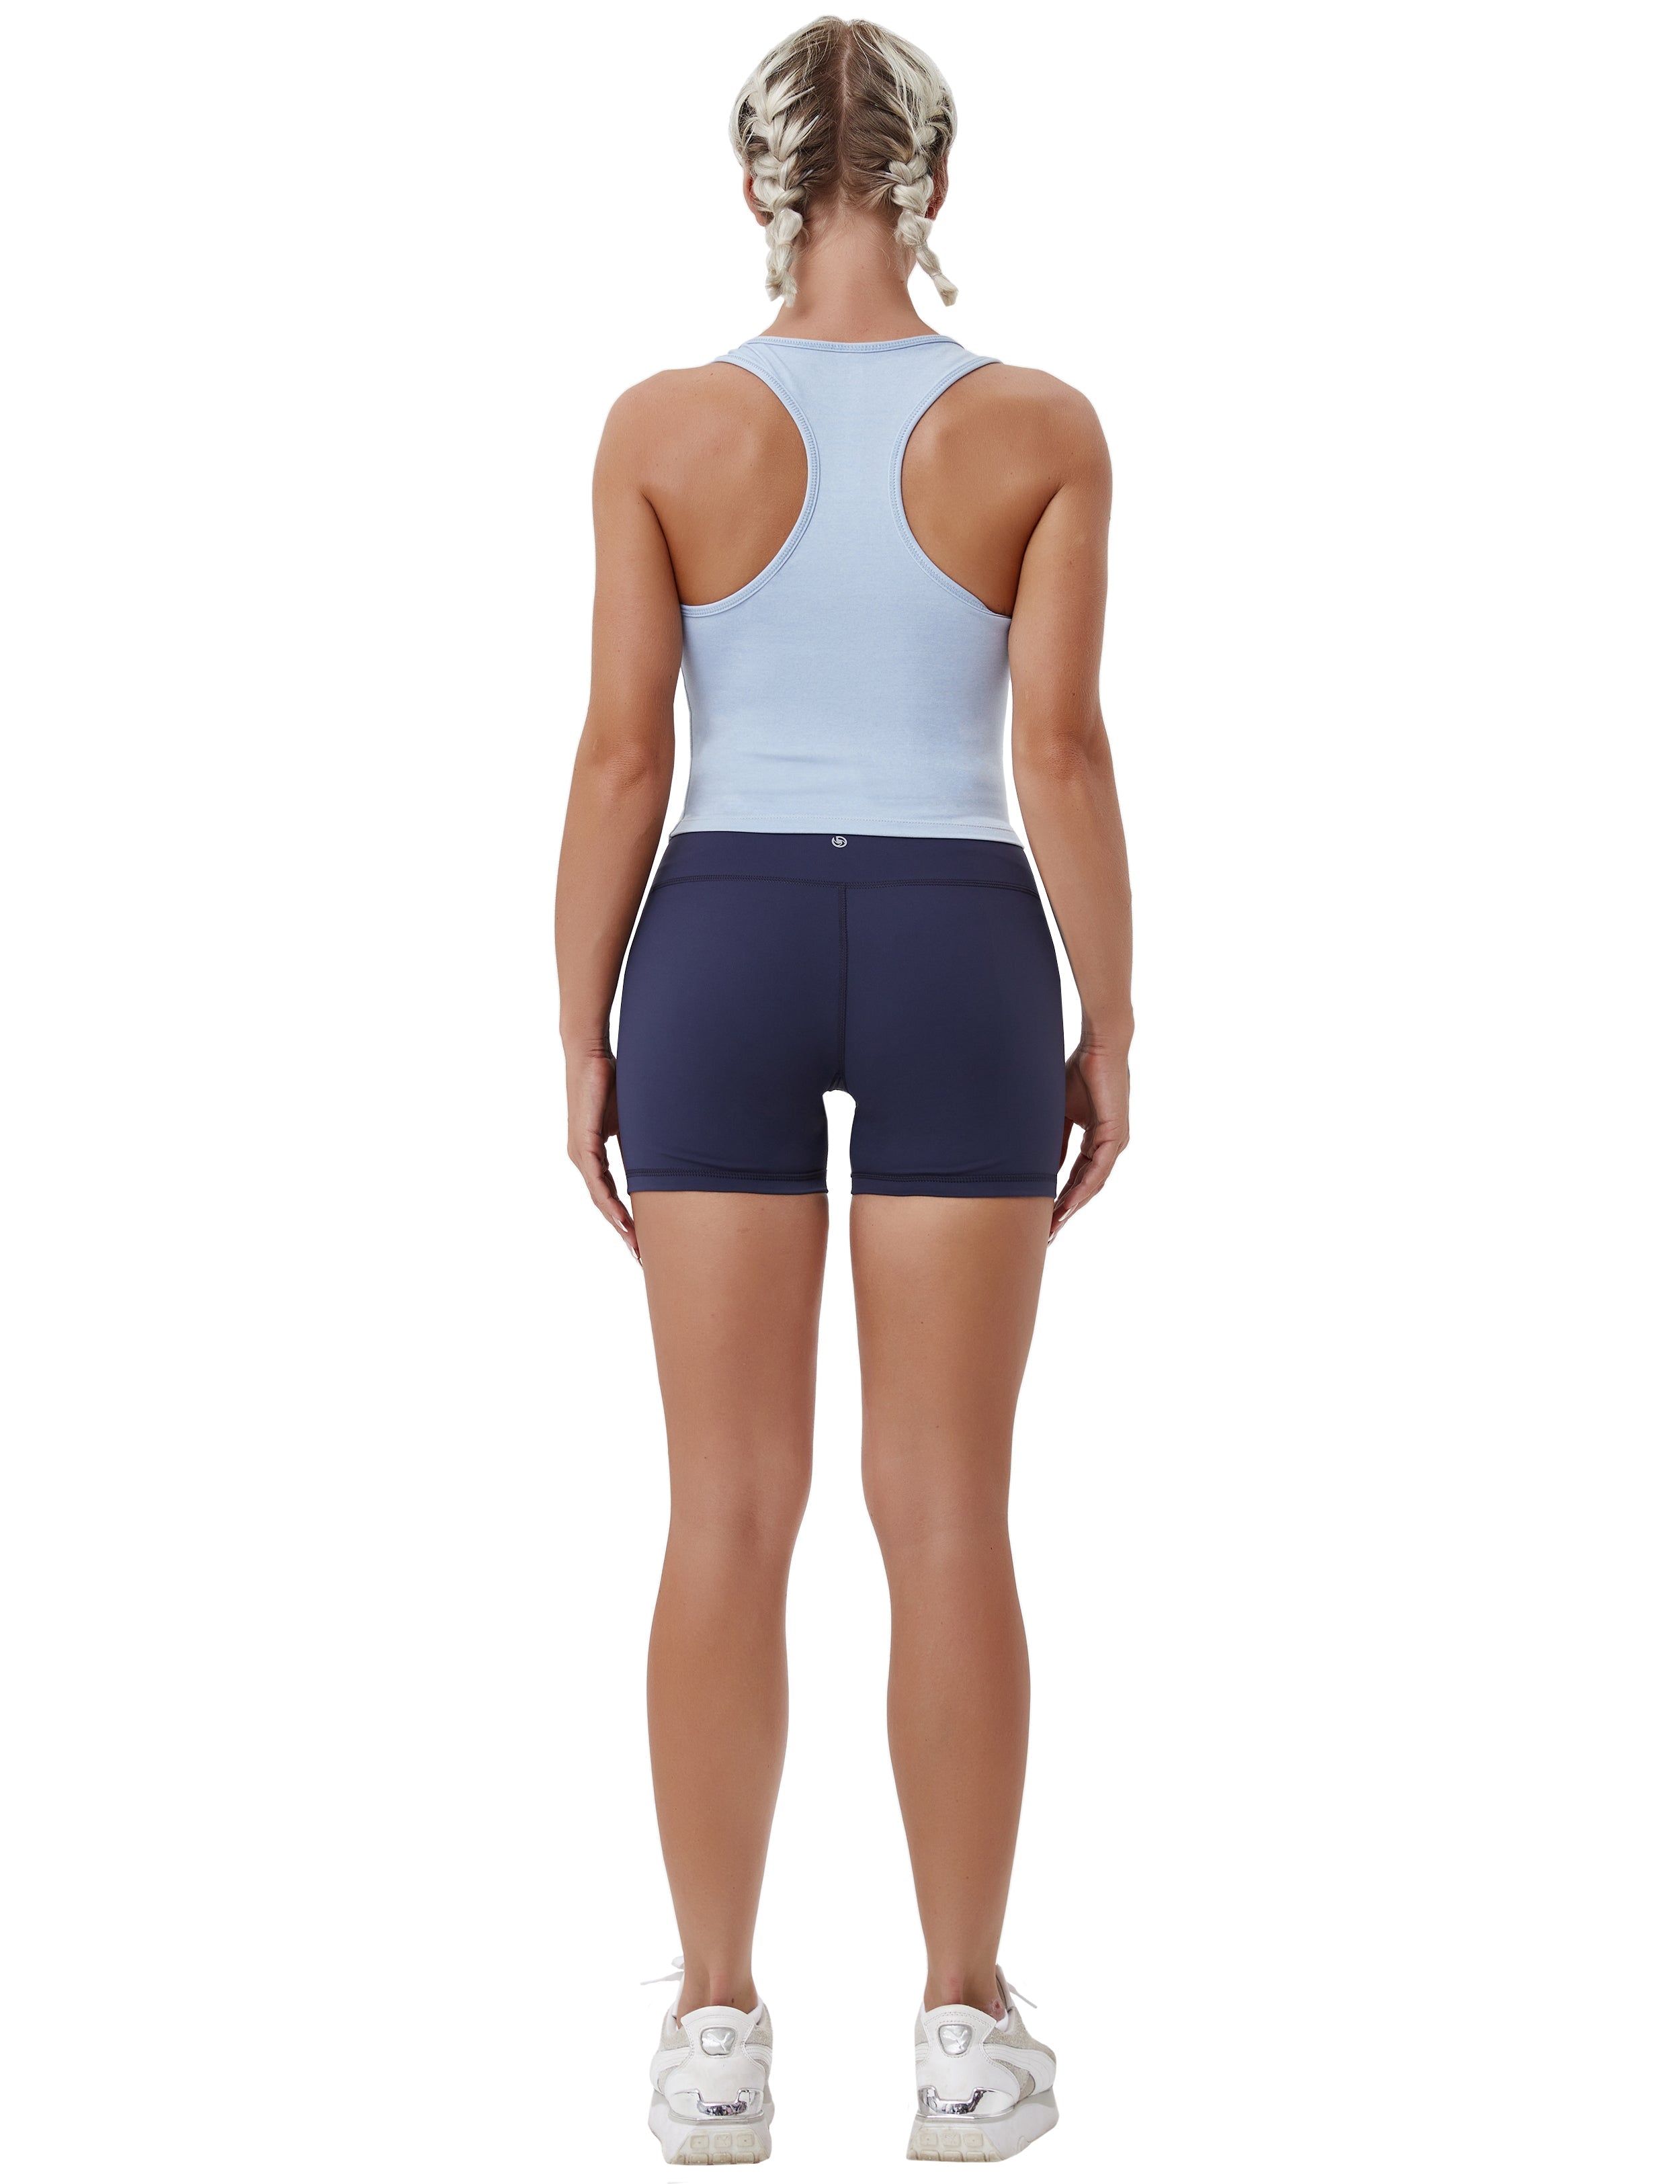 Racerback Athletic Crop Tank Tops heatherblue 92%Nylon/8%Spandex(Cotton Soft) Designed for Pilates Tight Fit So buttery soft, it feels weightless Sweat-wicking Four-way stretch Breathable Contours your body Sits below the waistband for moderate, everyday coverage